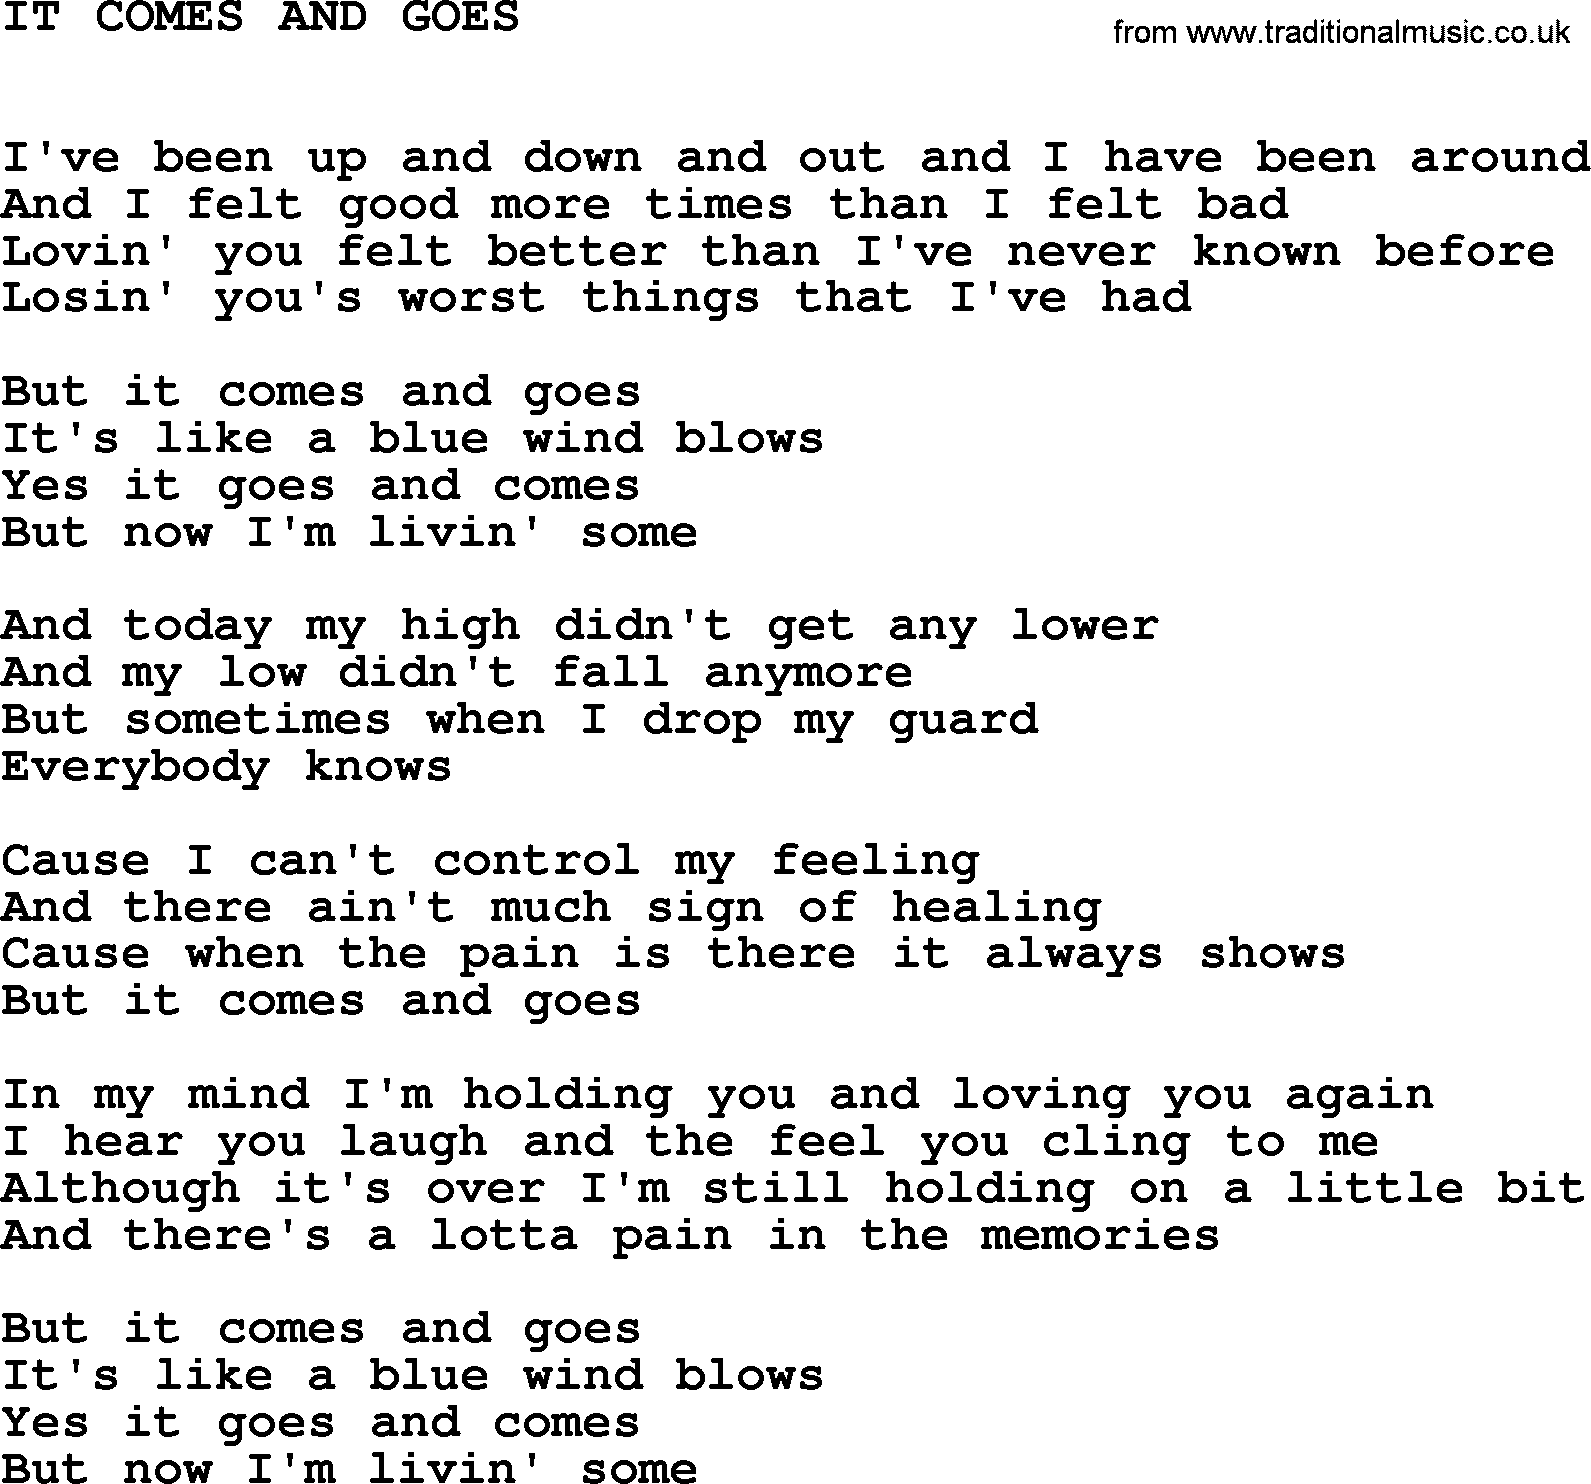 Johnny Cash song It Comes And Goes.txt lyrics